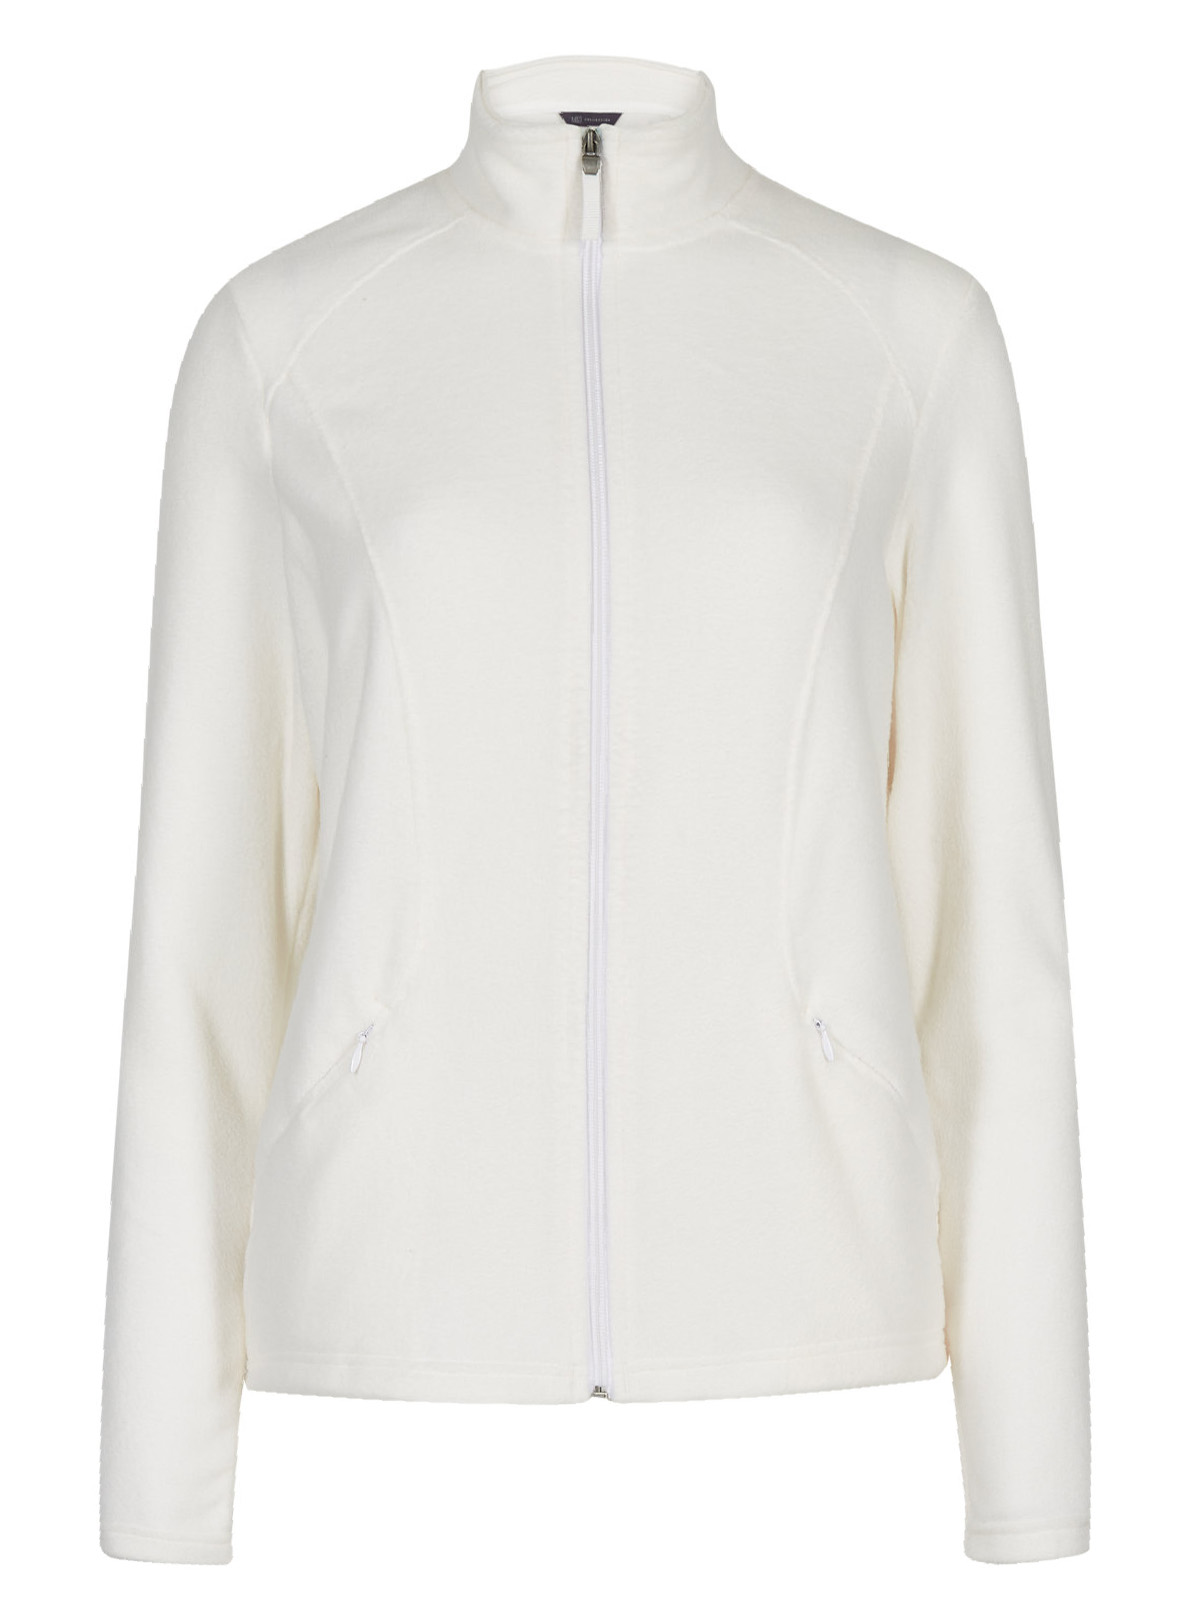 Marks and Spencer - - M&5 Winter WHITE Zip-Up Panelled Fleece Jacket ...